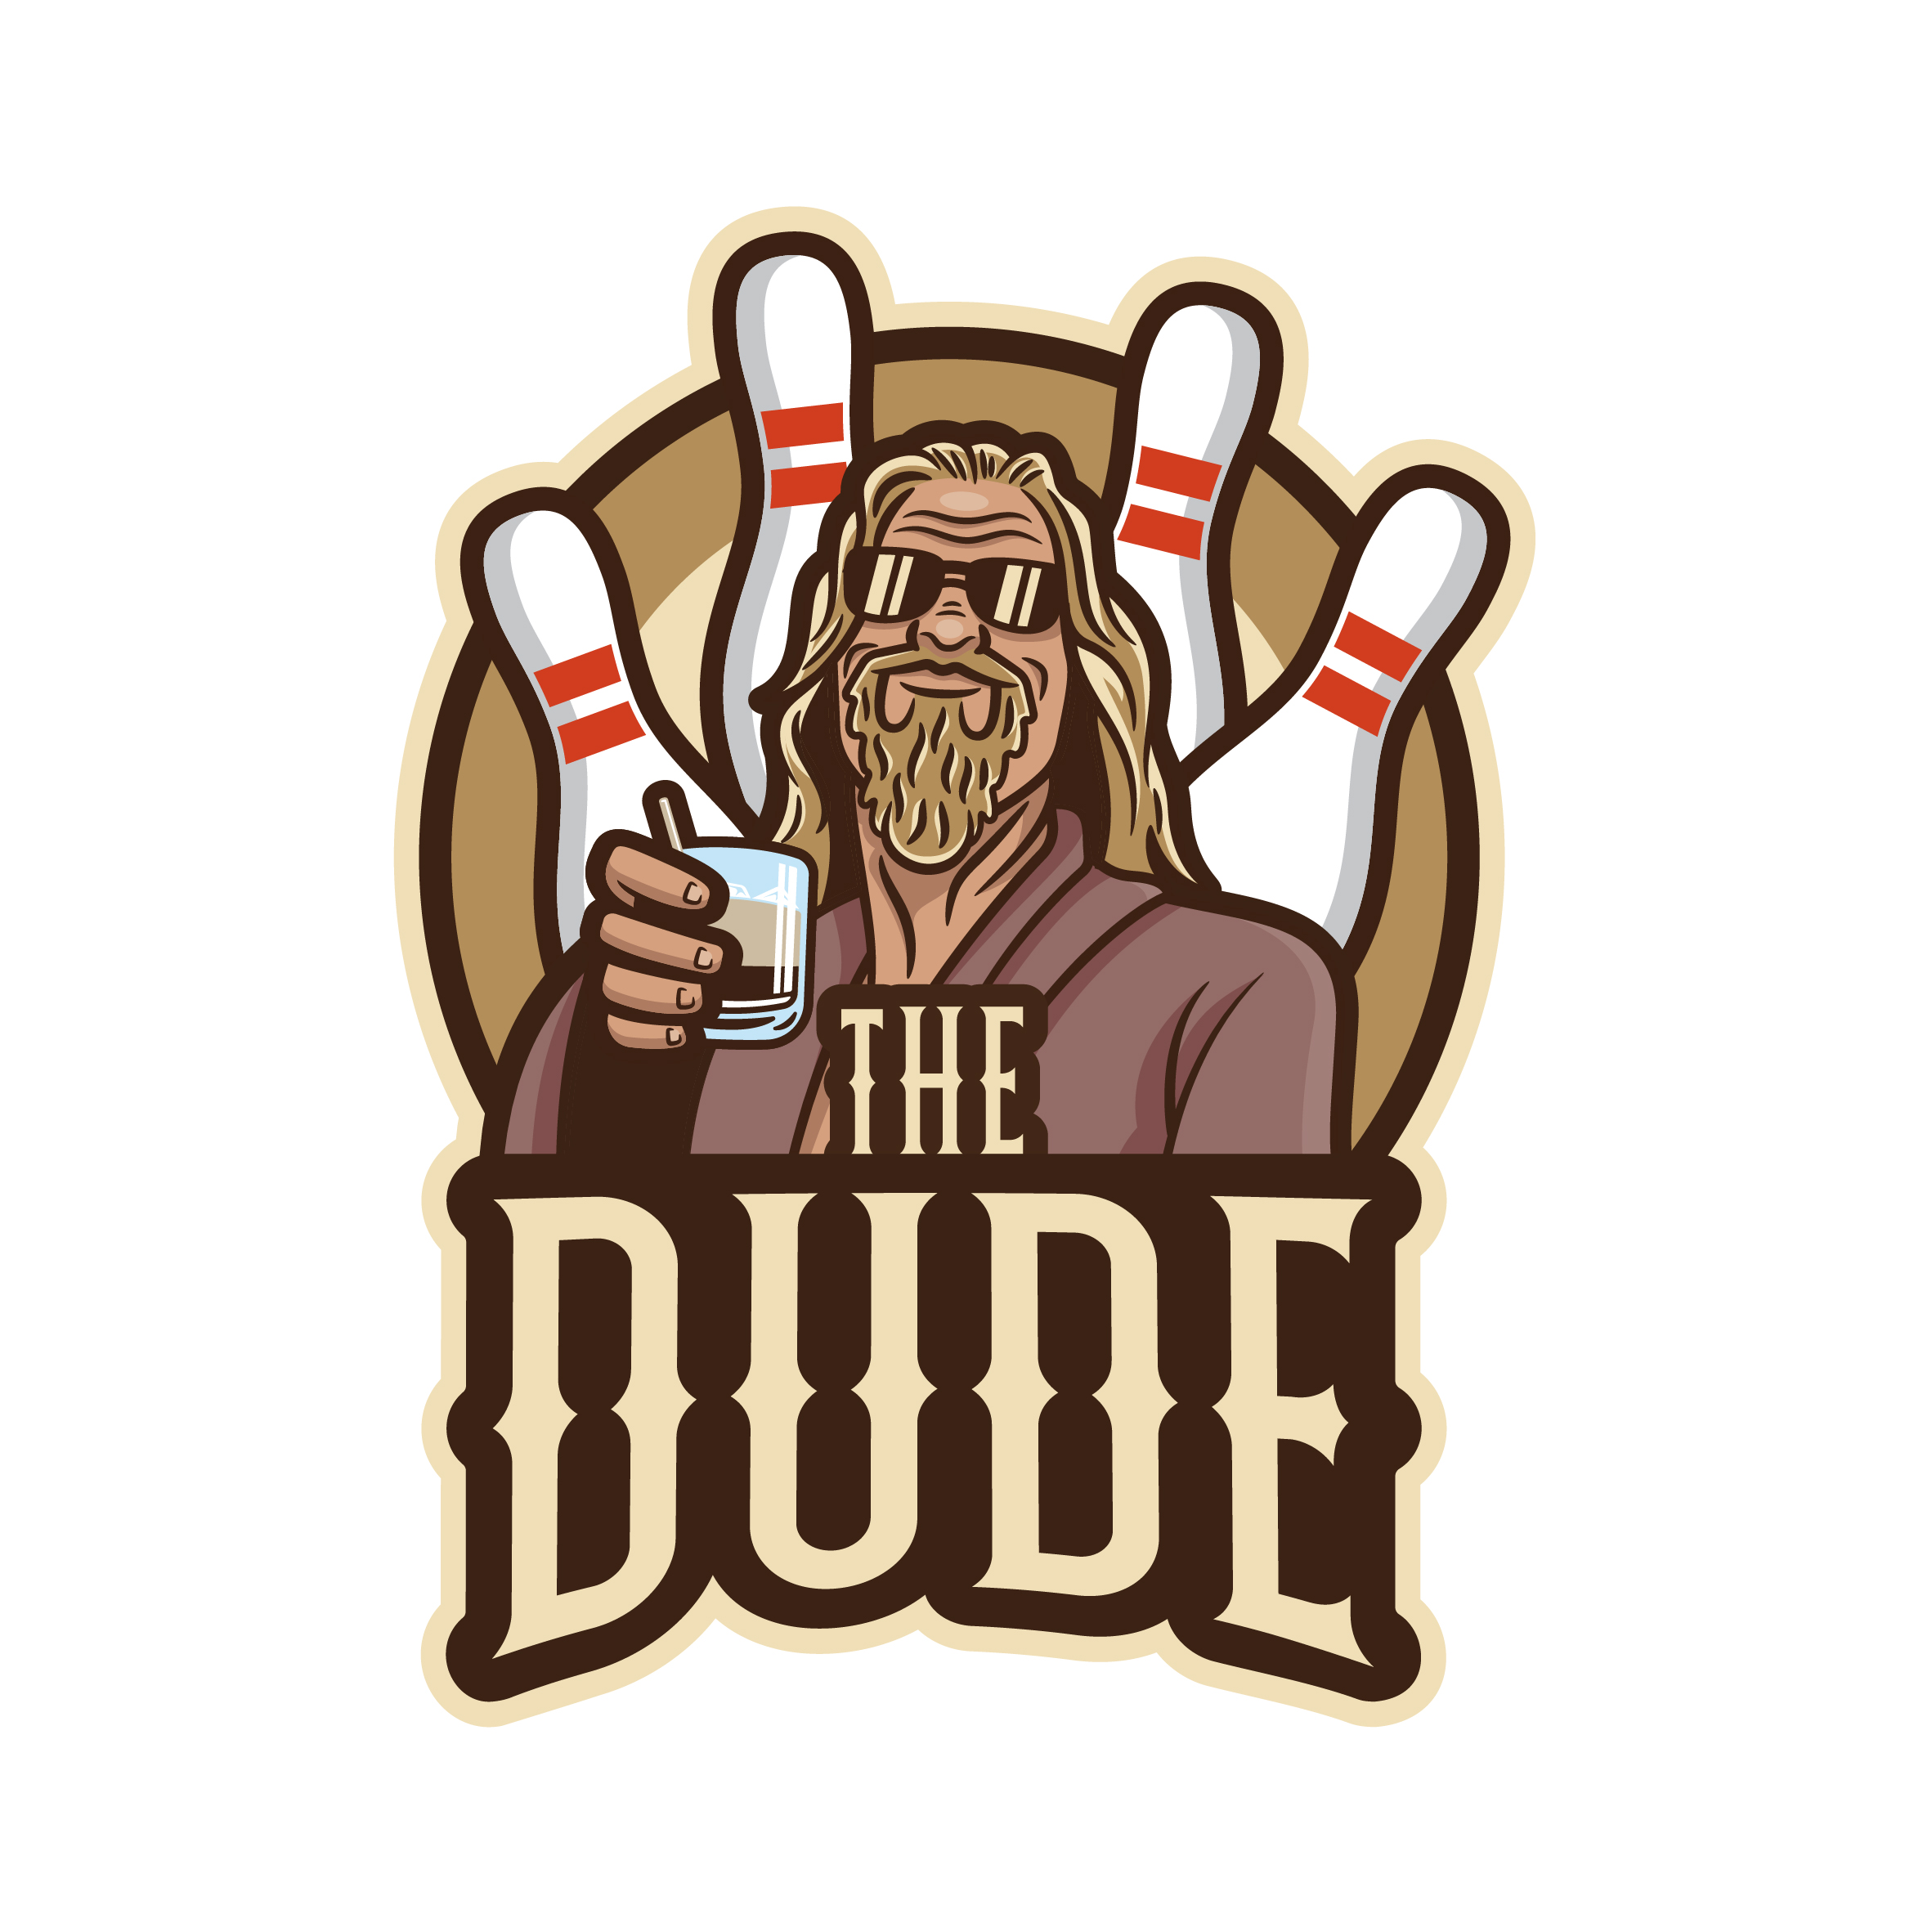 The Dude logo design by logo designer Tortoiseshell Black for your inspiration and for the worlds largest logo competition